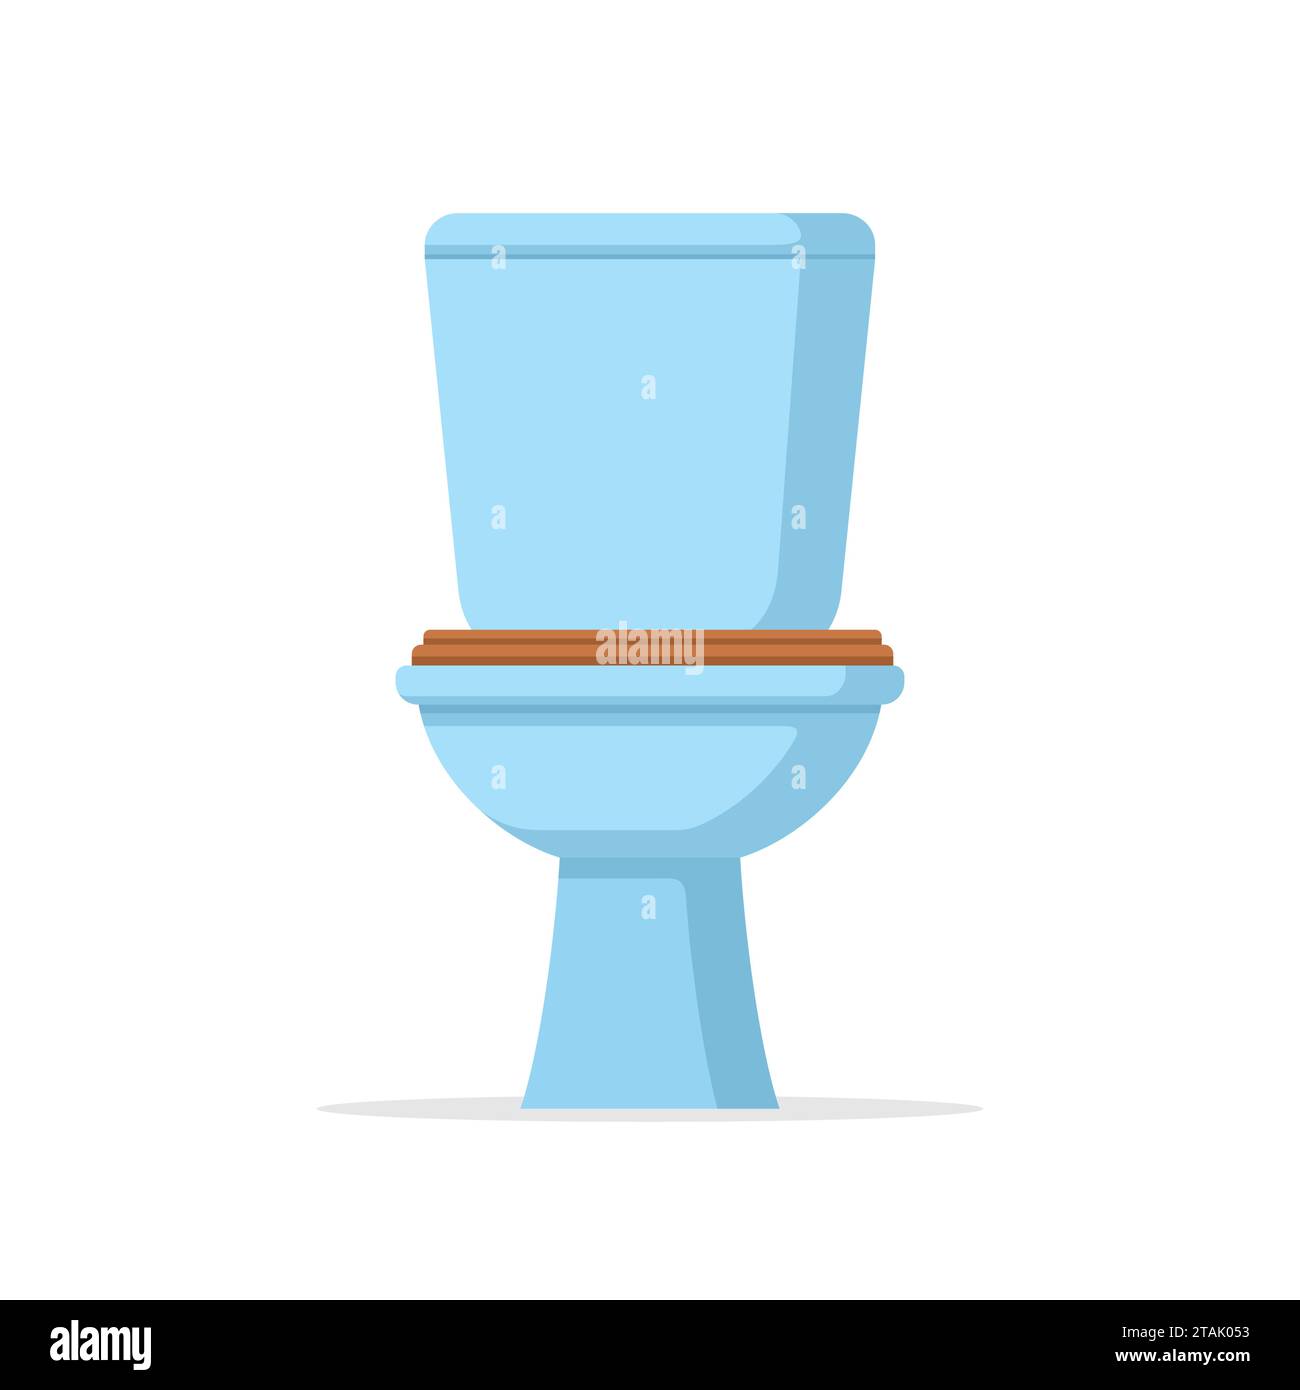 Classic ceramic toilet bowl with water tank in flat style isolated on white background. Equipment and accessories for restroom. Lavatory furnishing Stock Vector